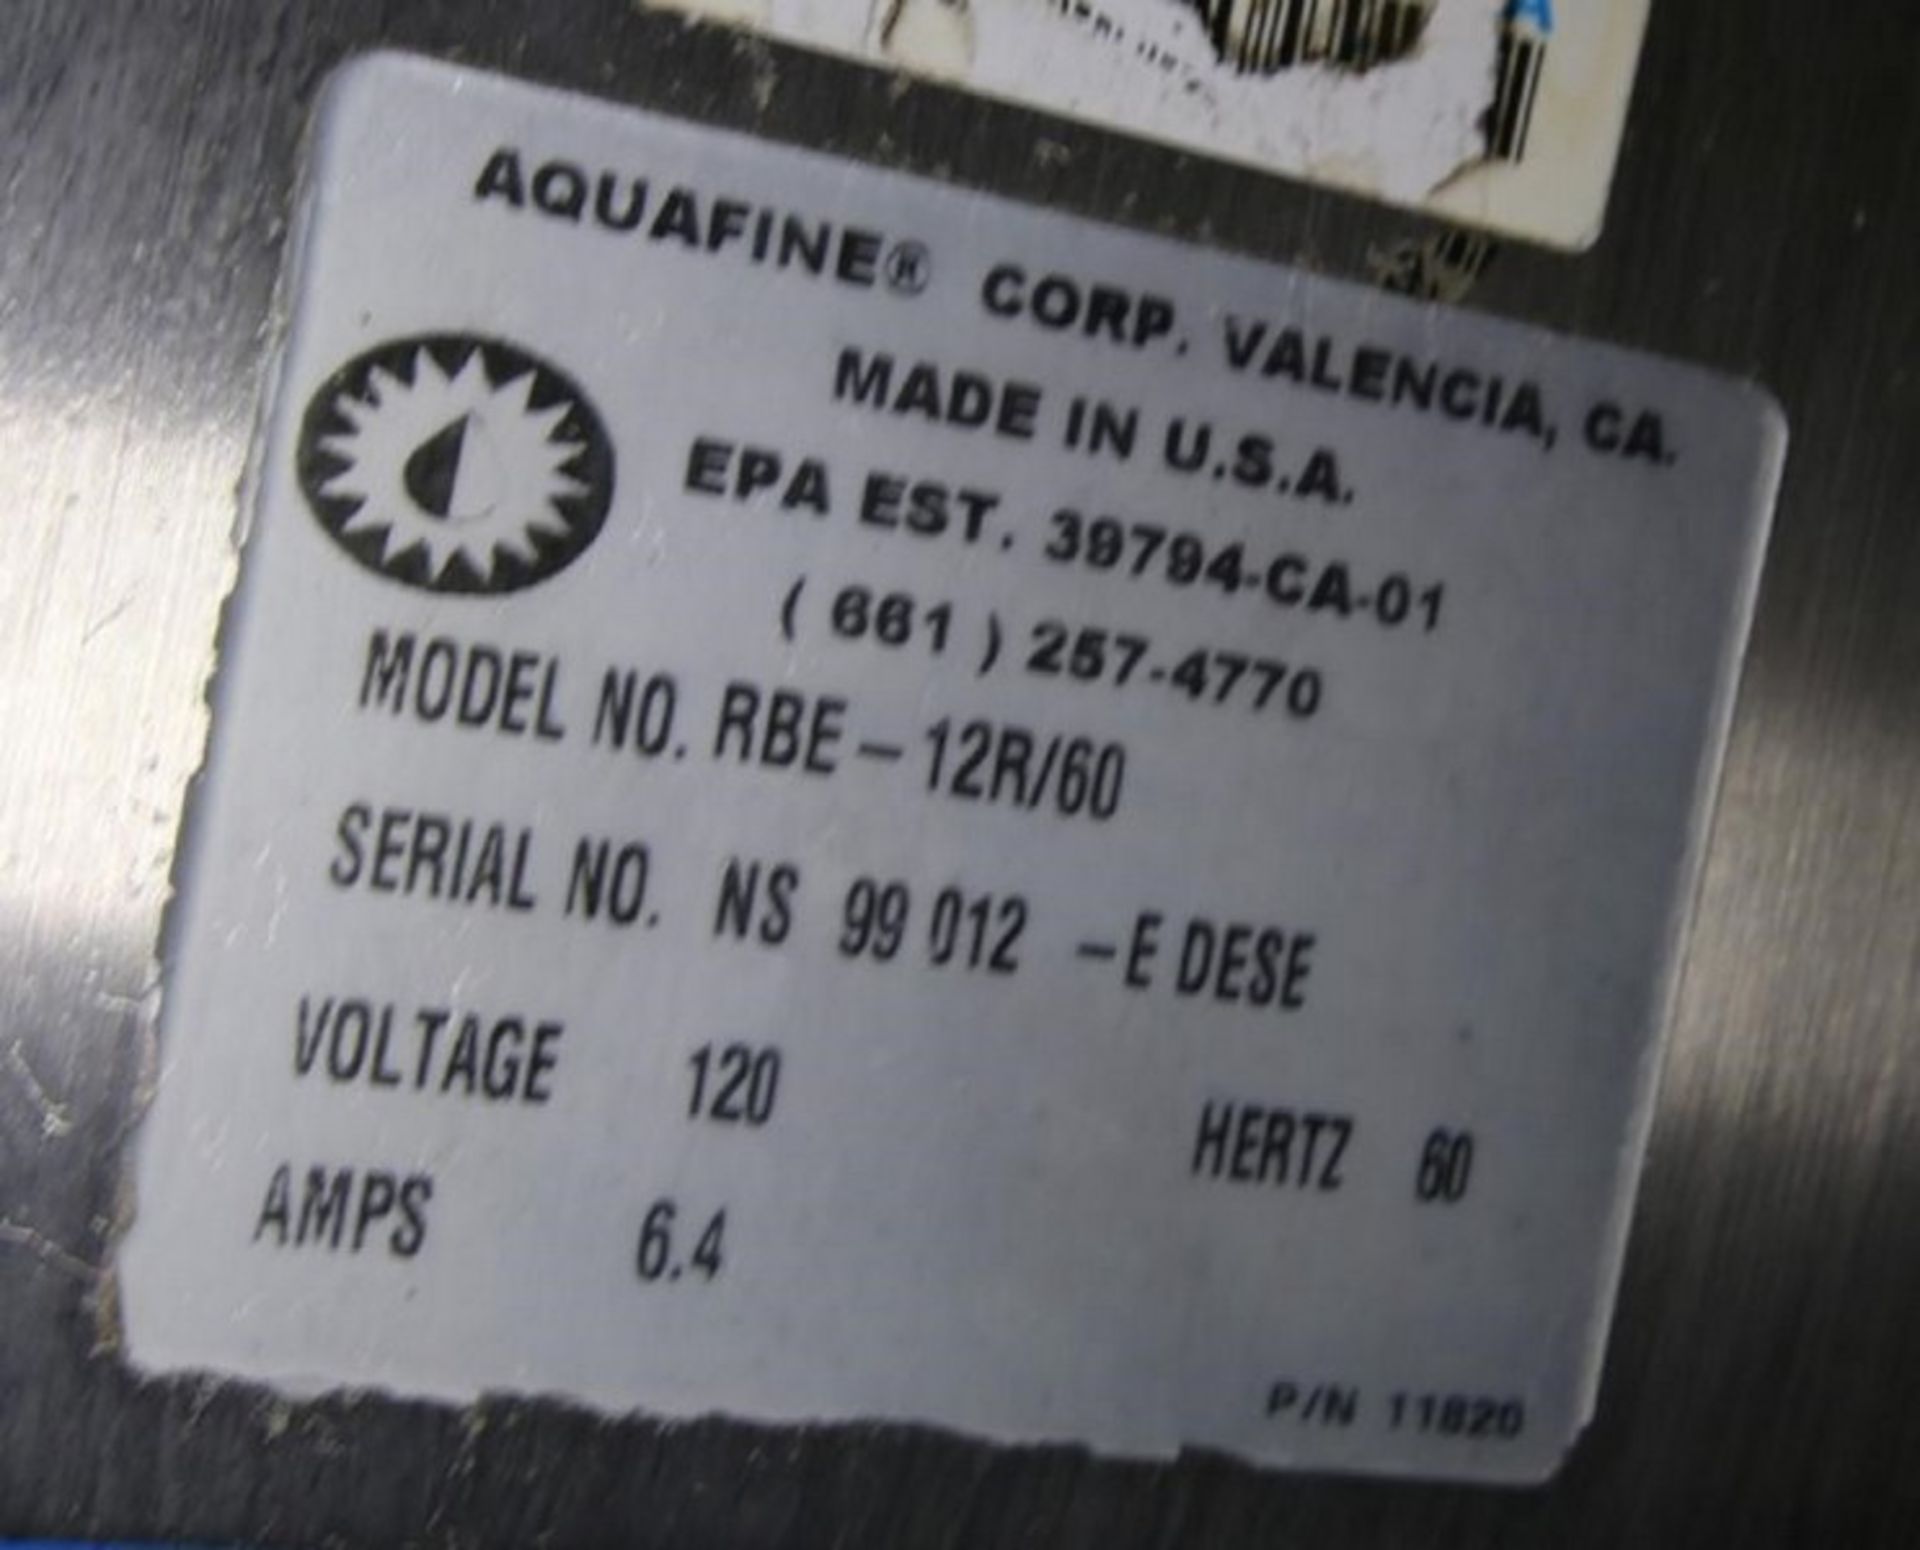 Aquafine S/S UV System, Model RBE - 12R/60, SN NS 99 012-EDESE, 120V,4" Flanged Connectors, with - Bild 7 aus 7